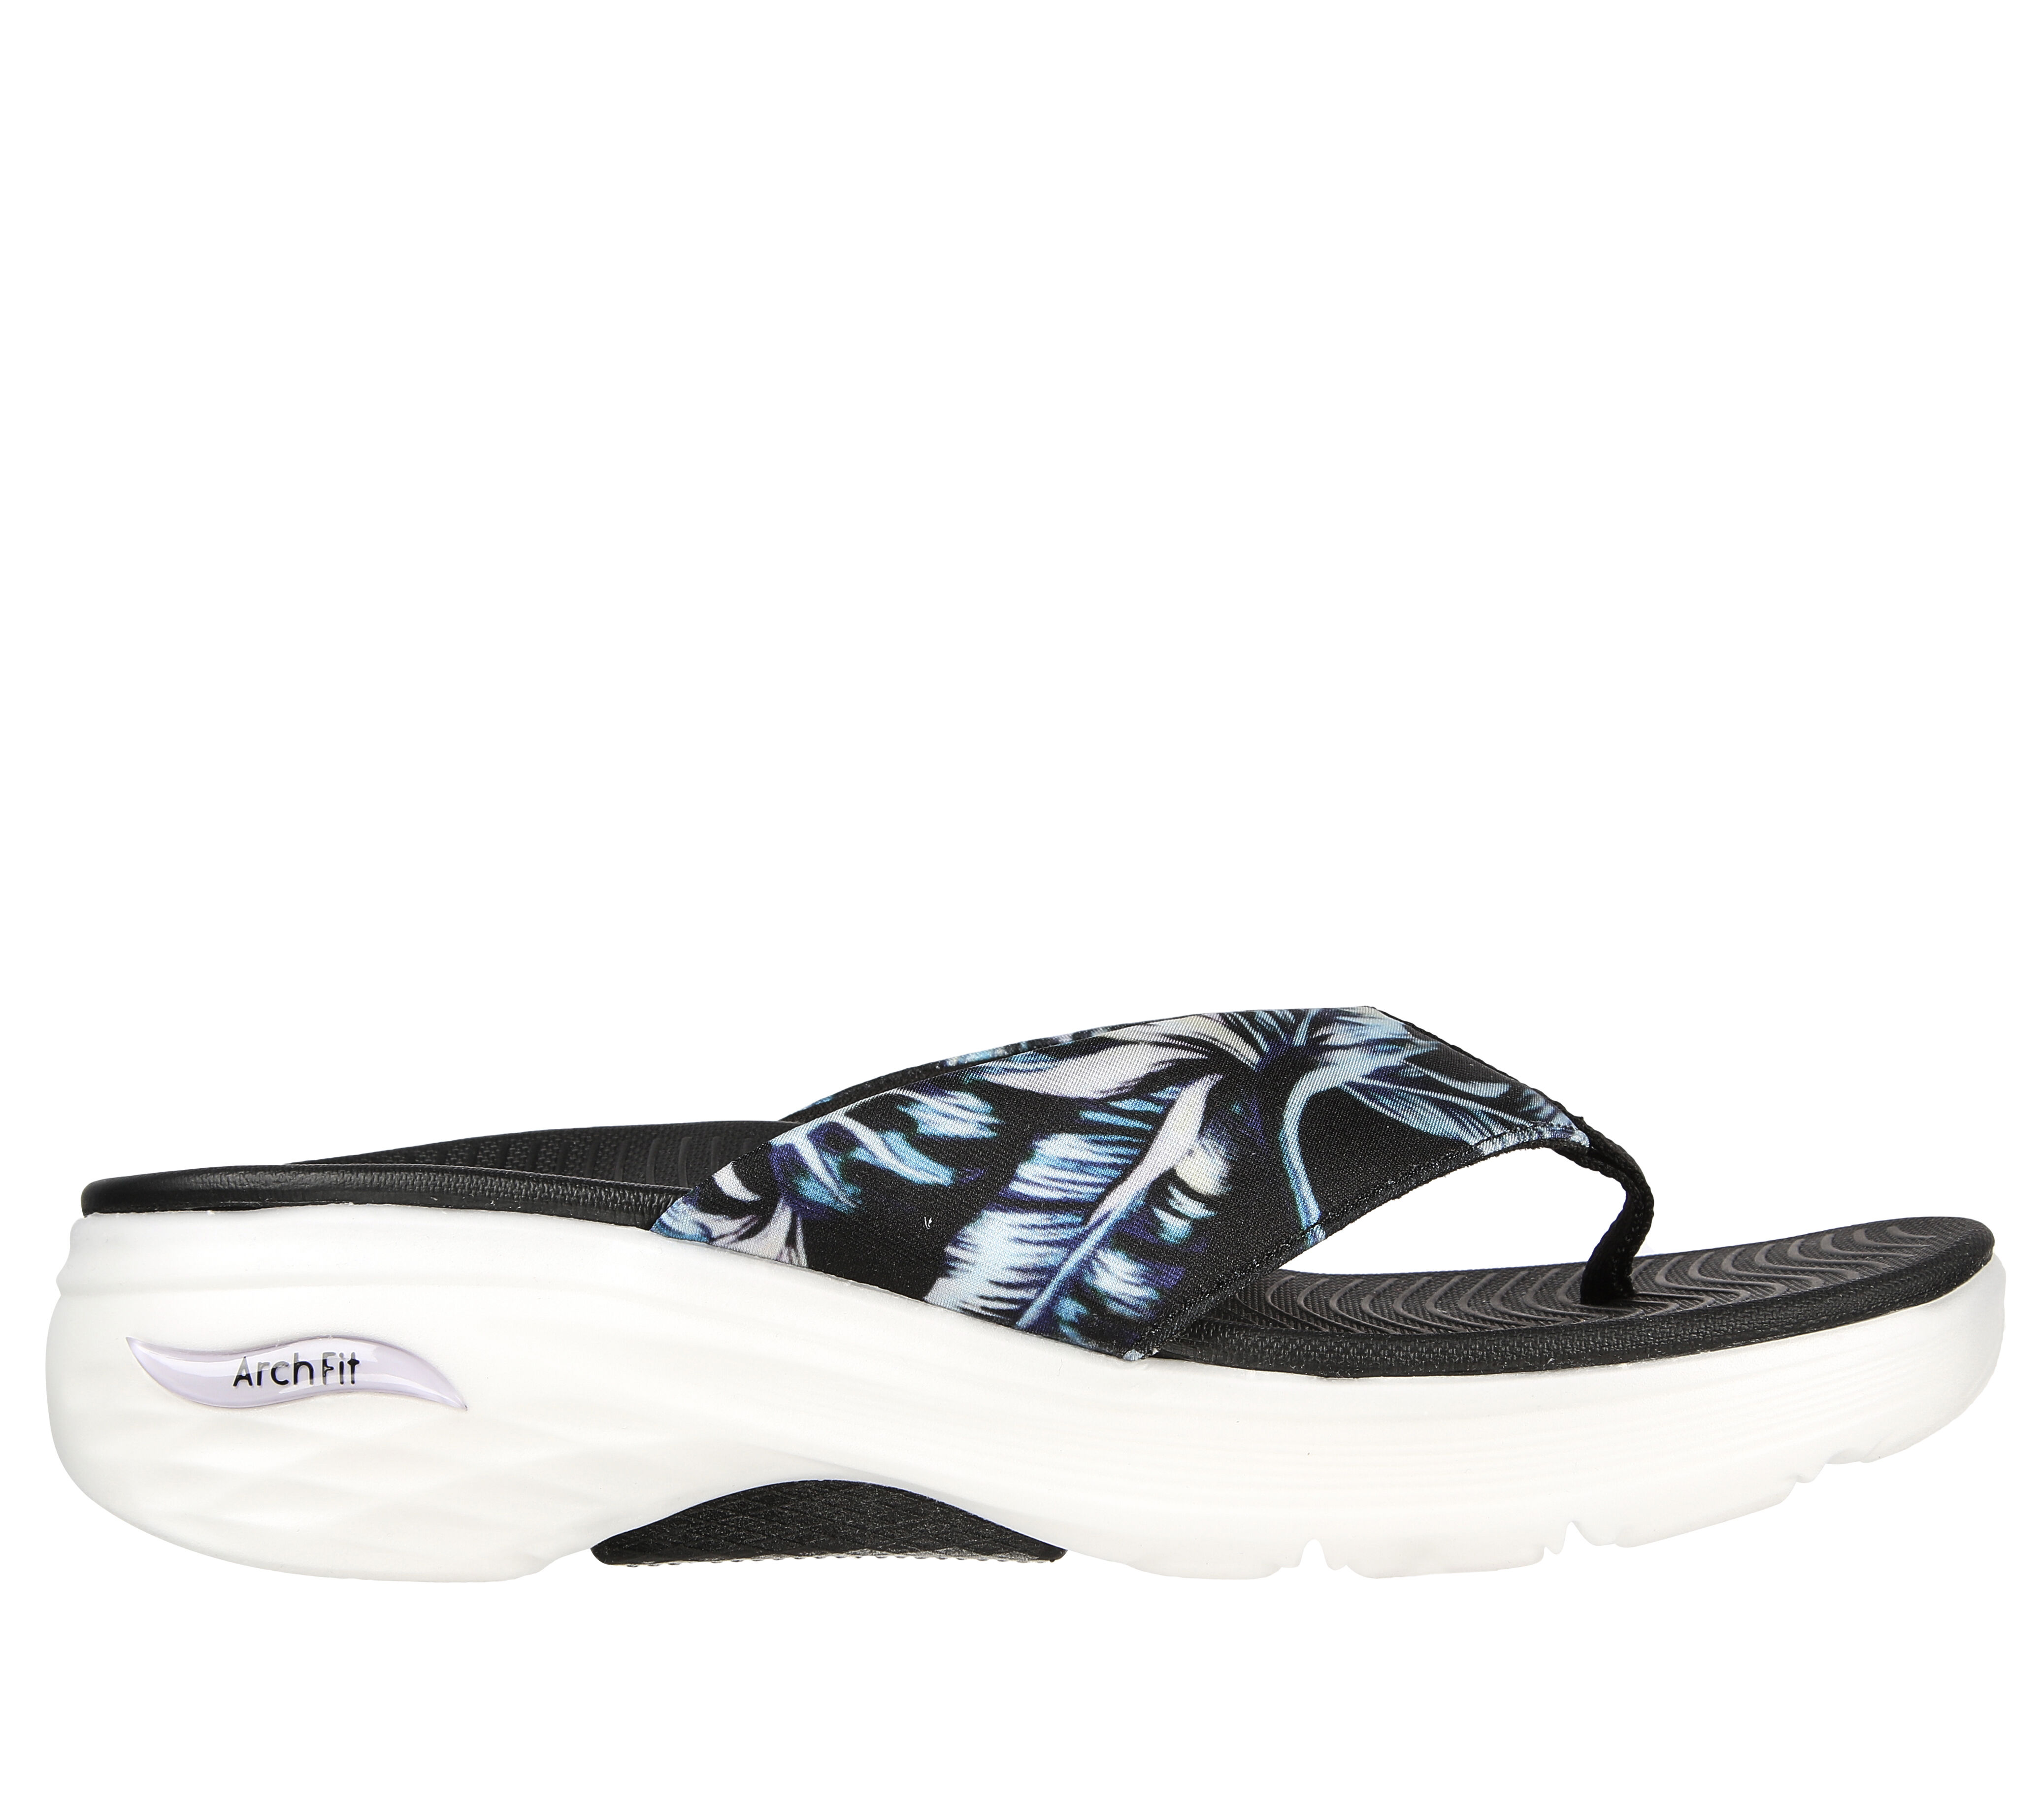 Max Cushioning Arch Fit Prime - Island Time